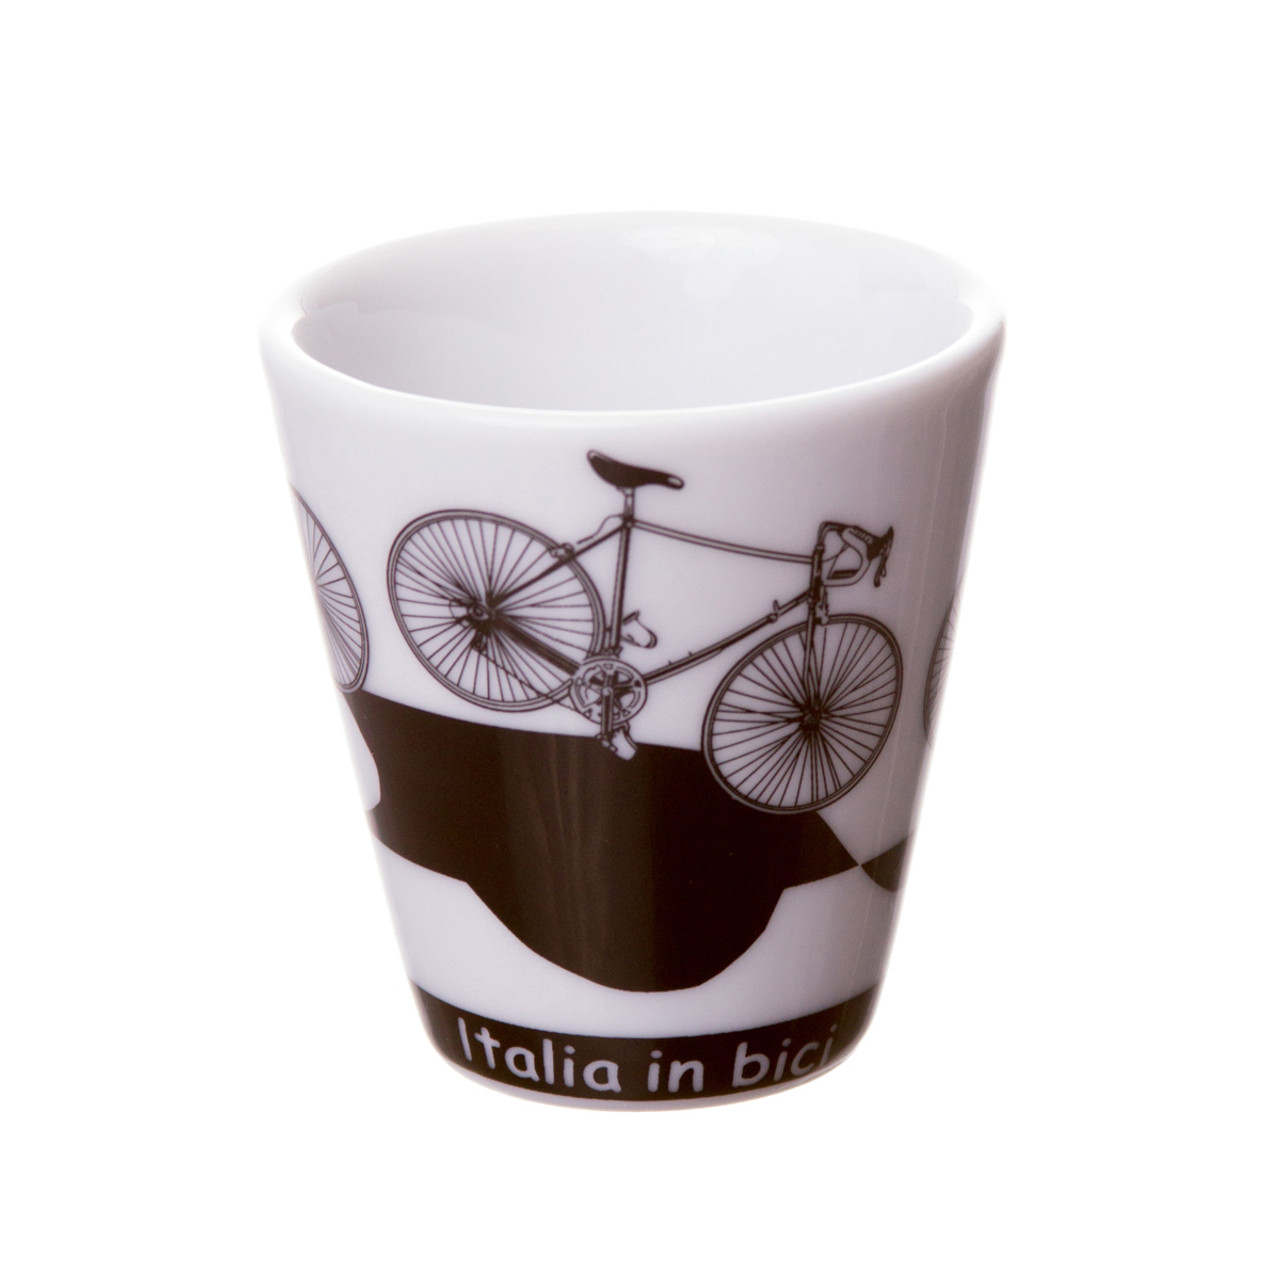 https://cdn11.bigcommerce.com/s-6h7ychjk4/images/stencil/1280x1280/products/8163/89212/italia-in-bici-espresso-cup-1-front__47099.1597951701.jpg?c=1&imbypass=on